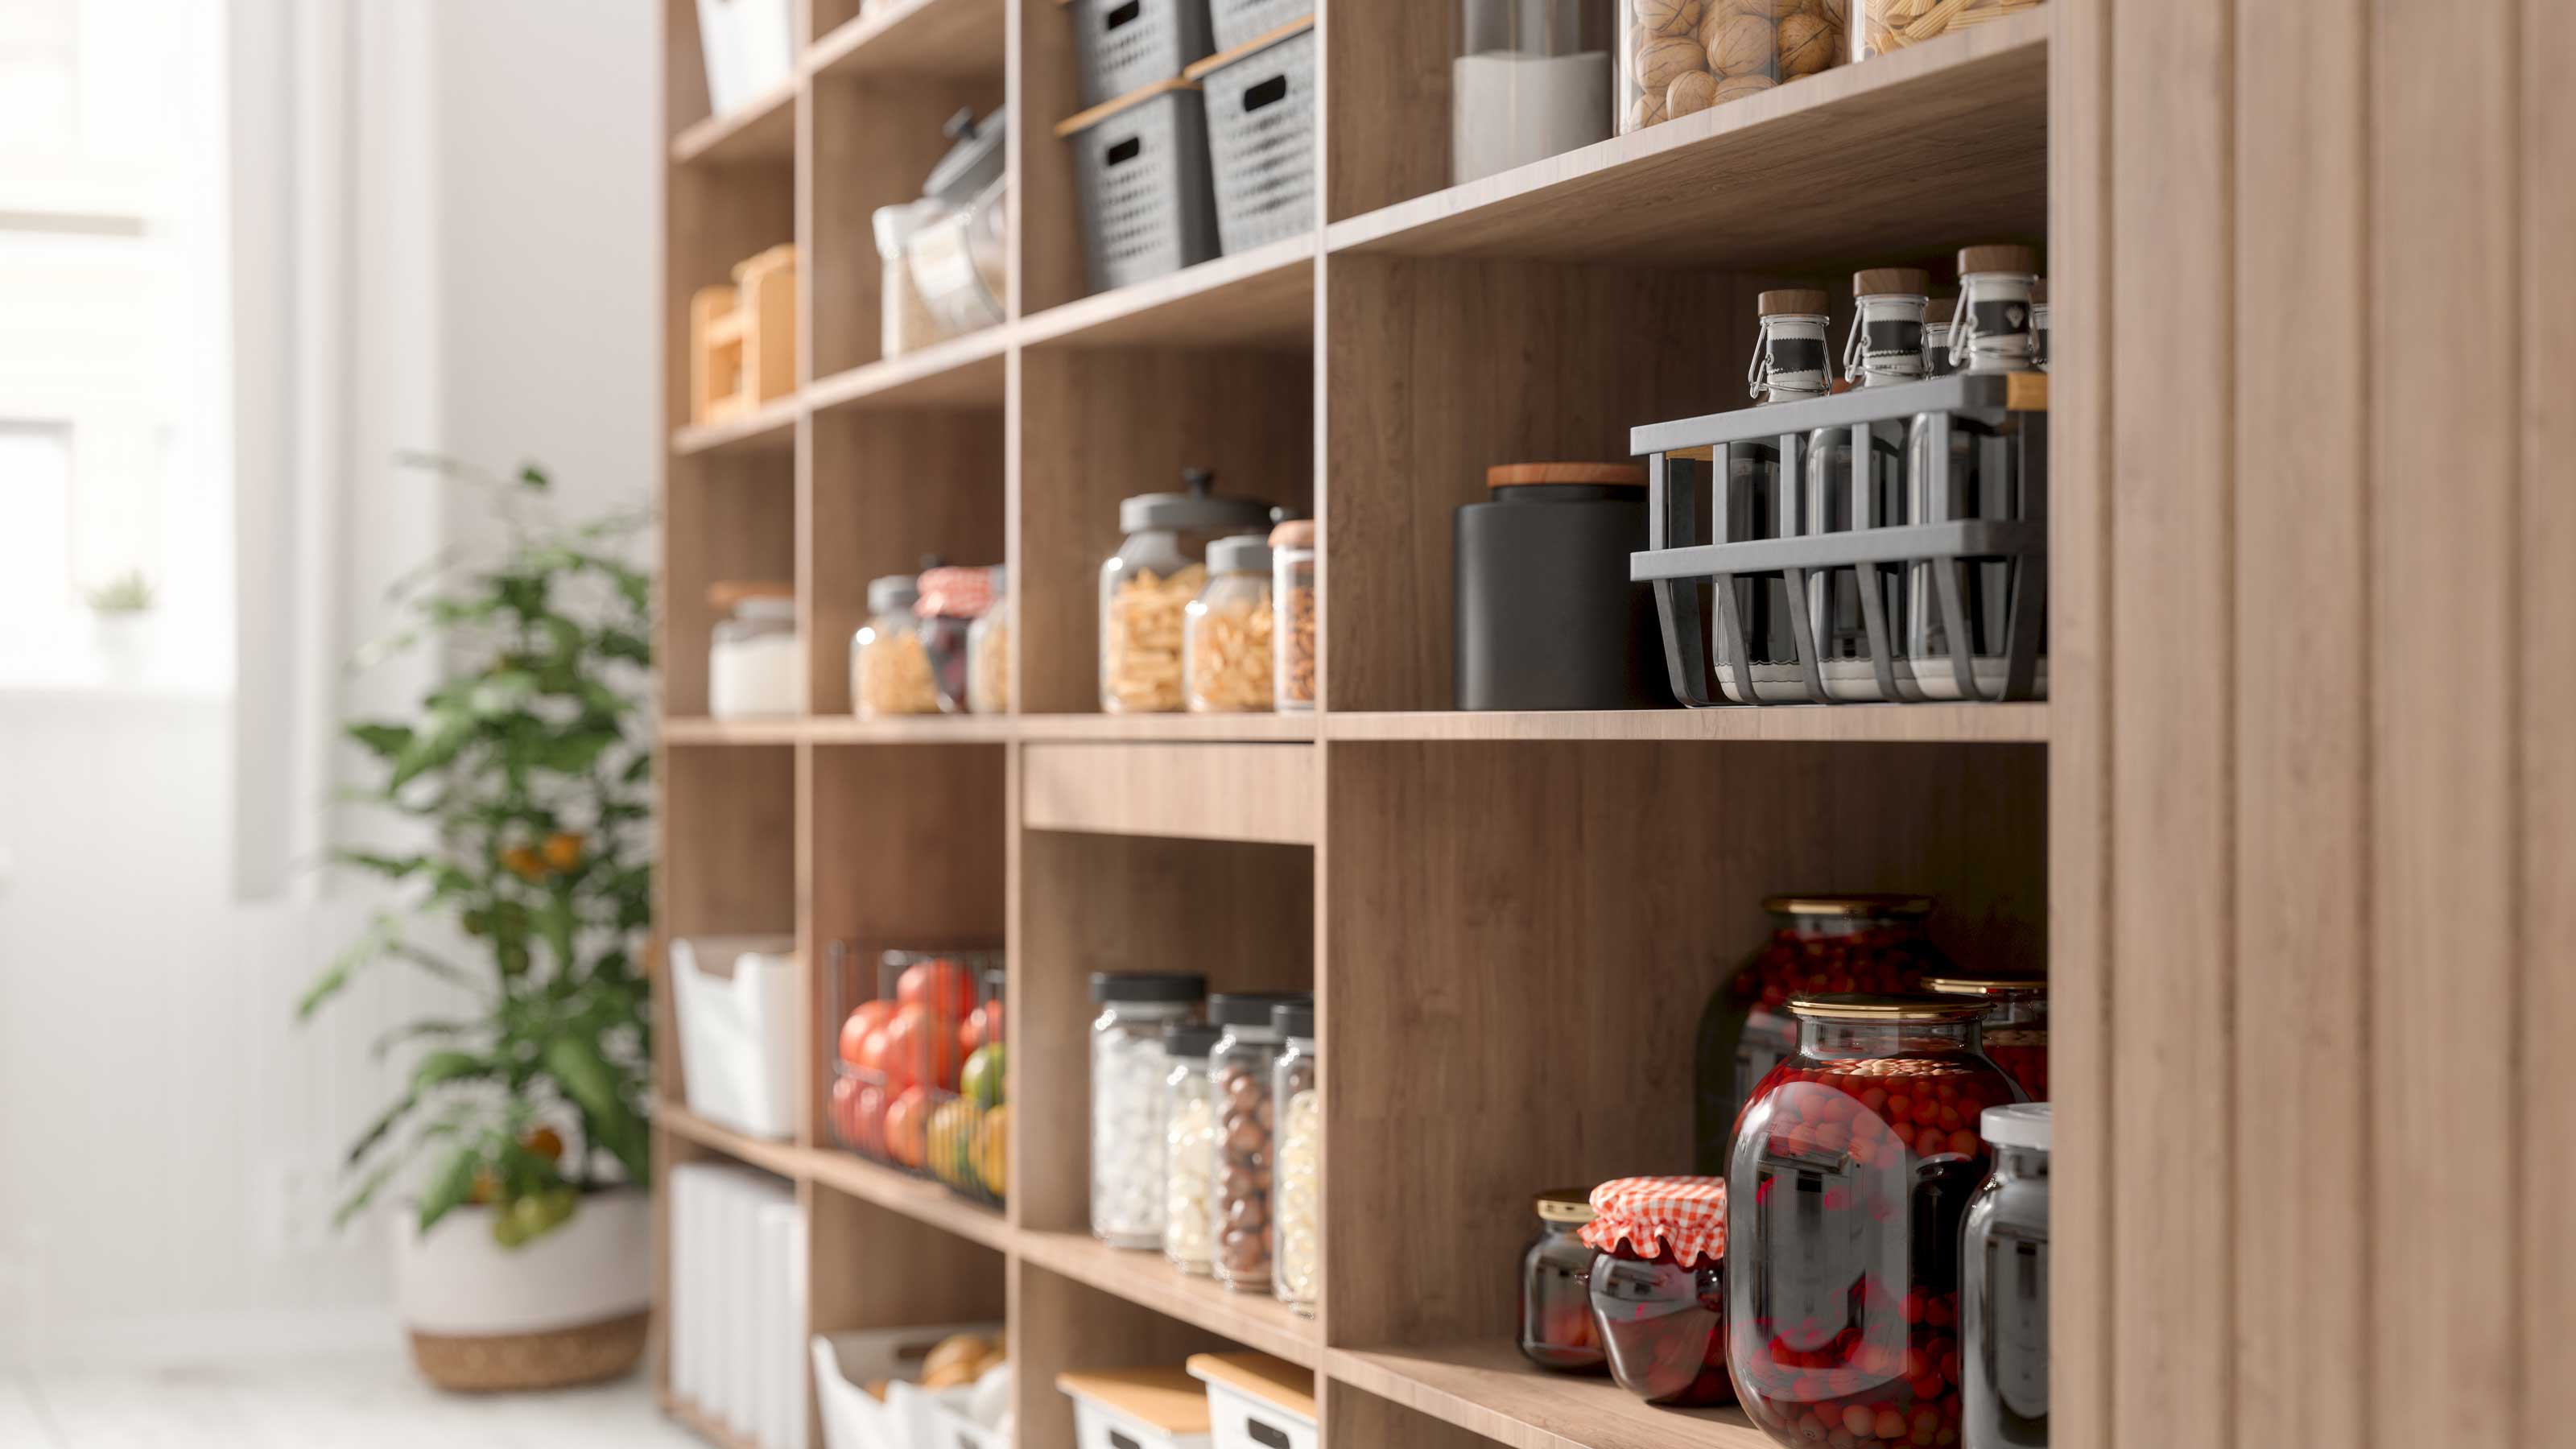 8 Tips To Remember When Shopping For Organizing Product – The Home